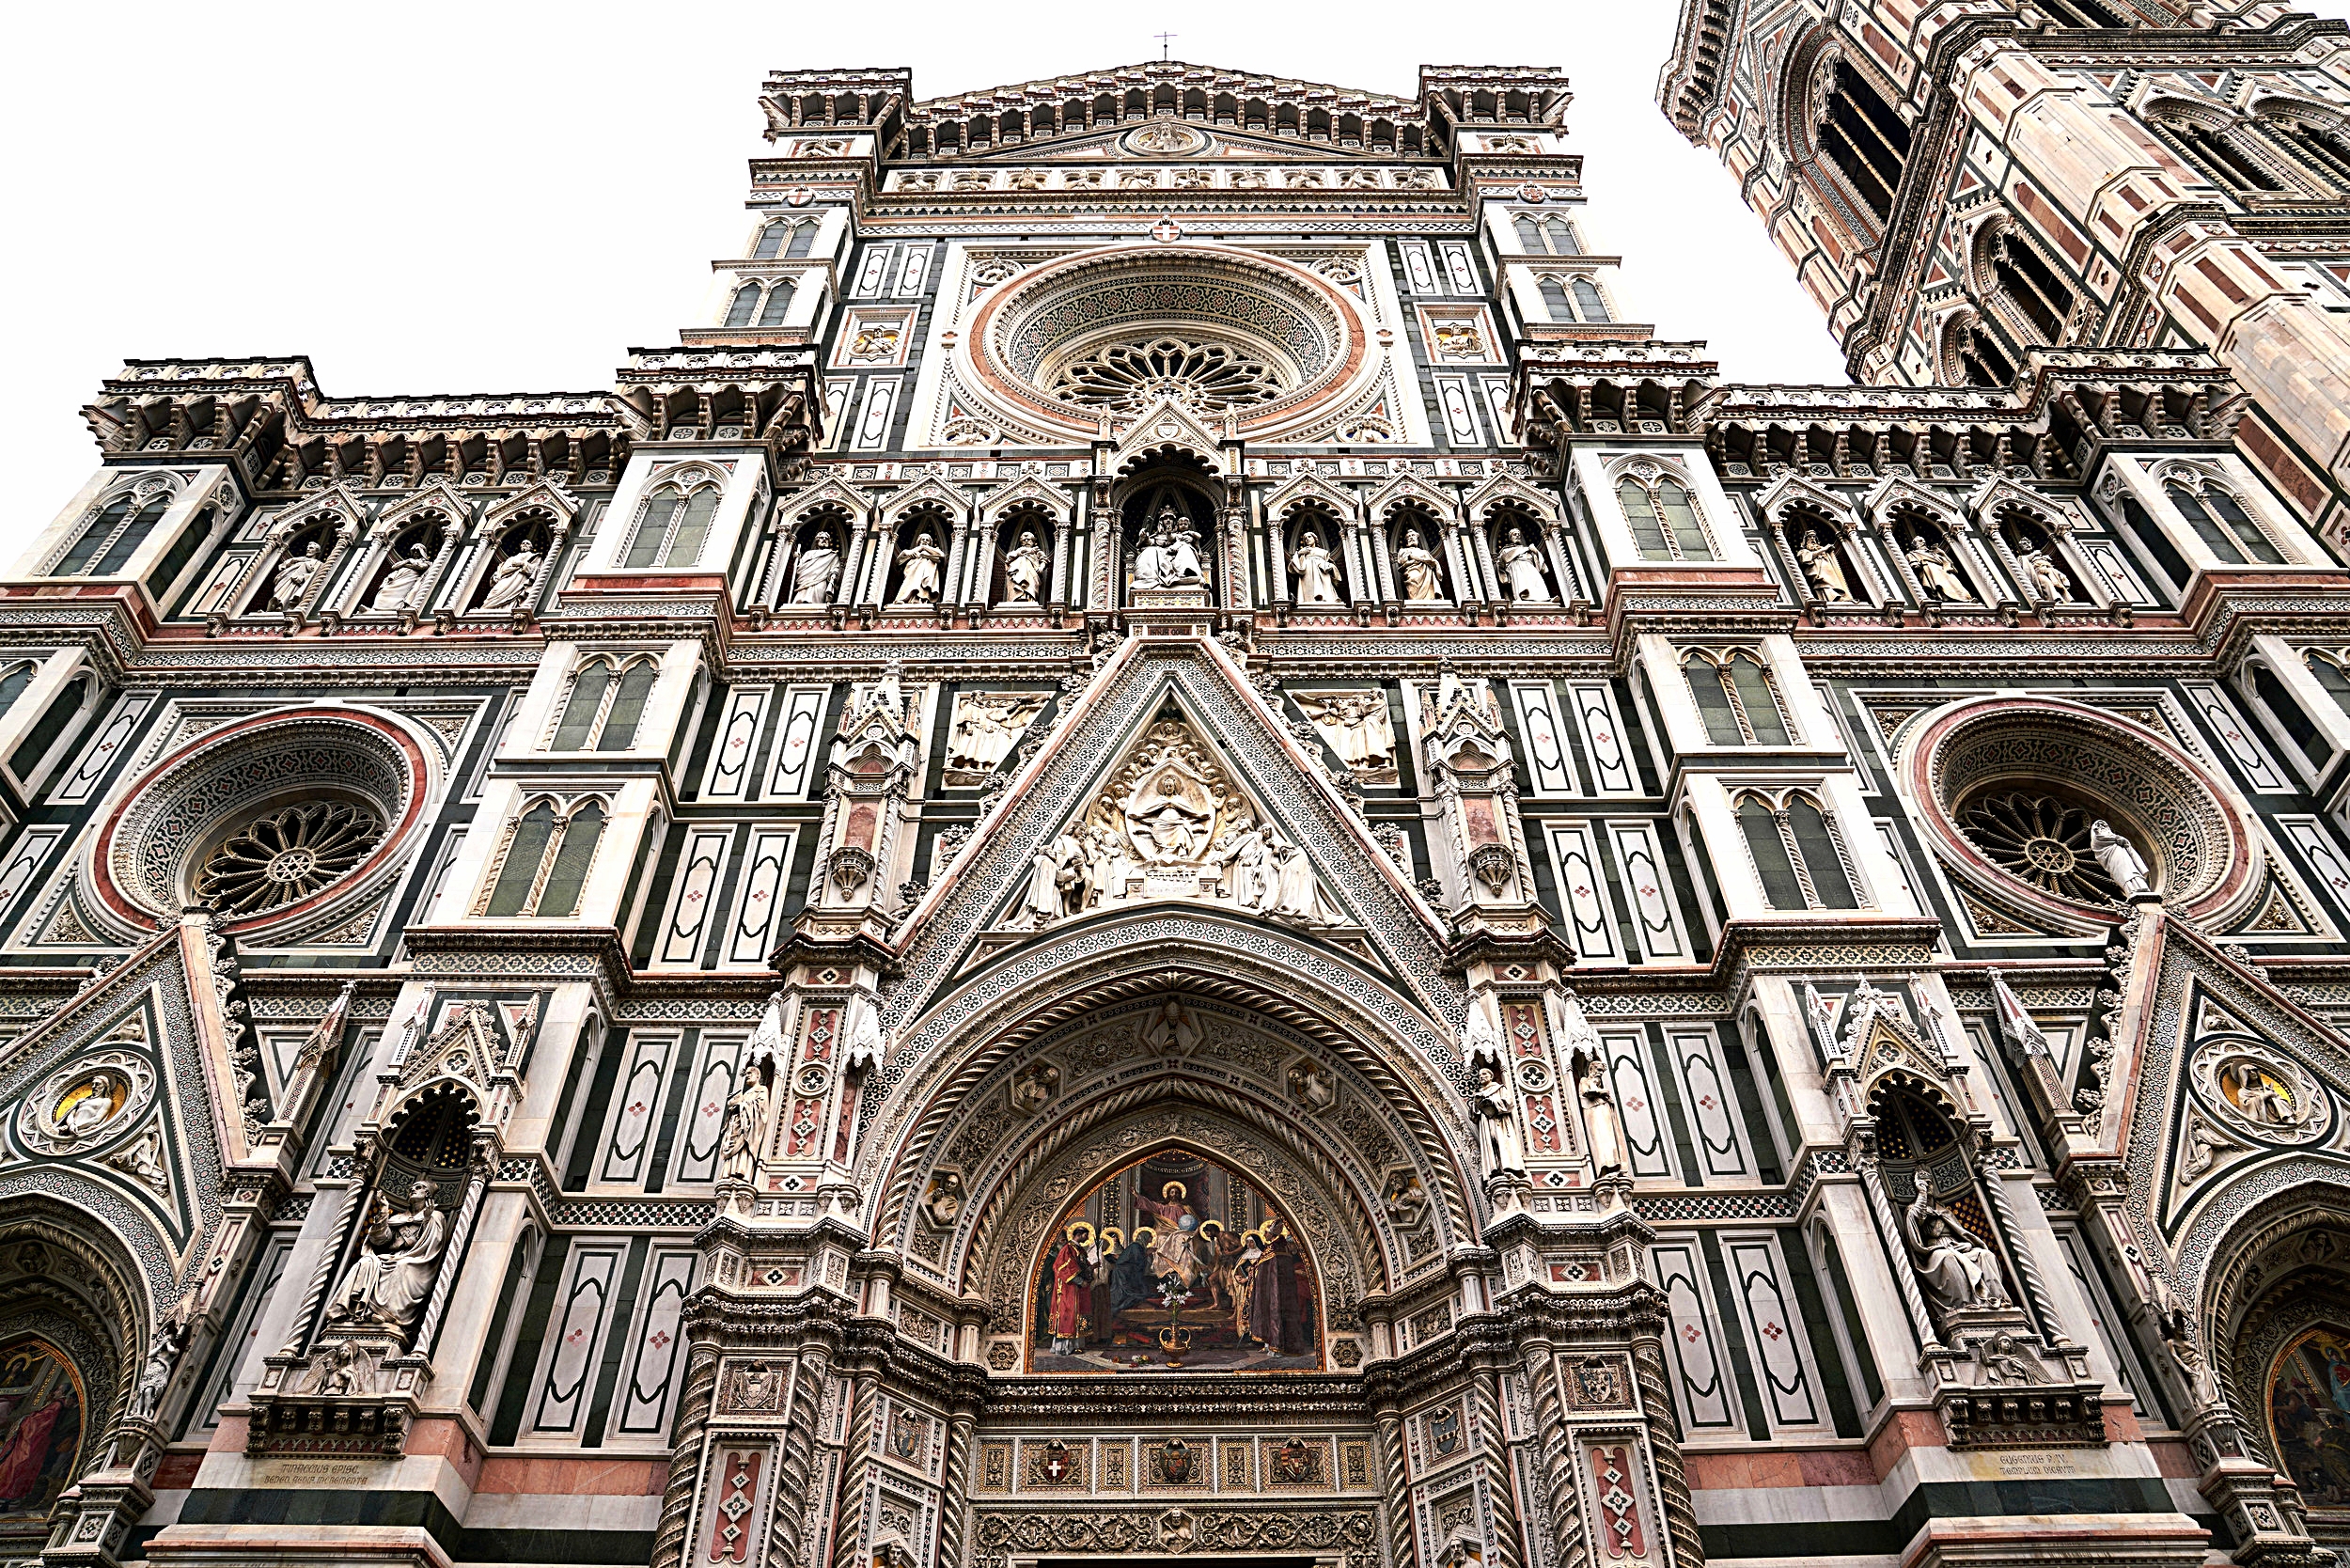  The very ornate entrance to Florence cathedral.  